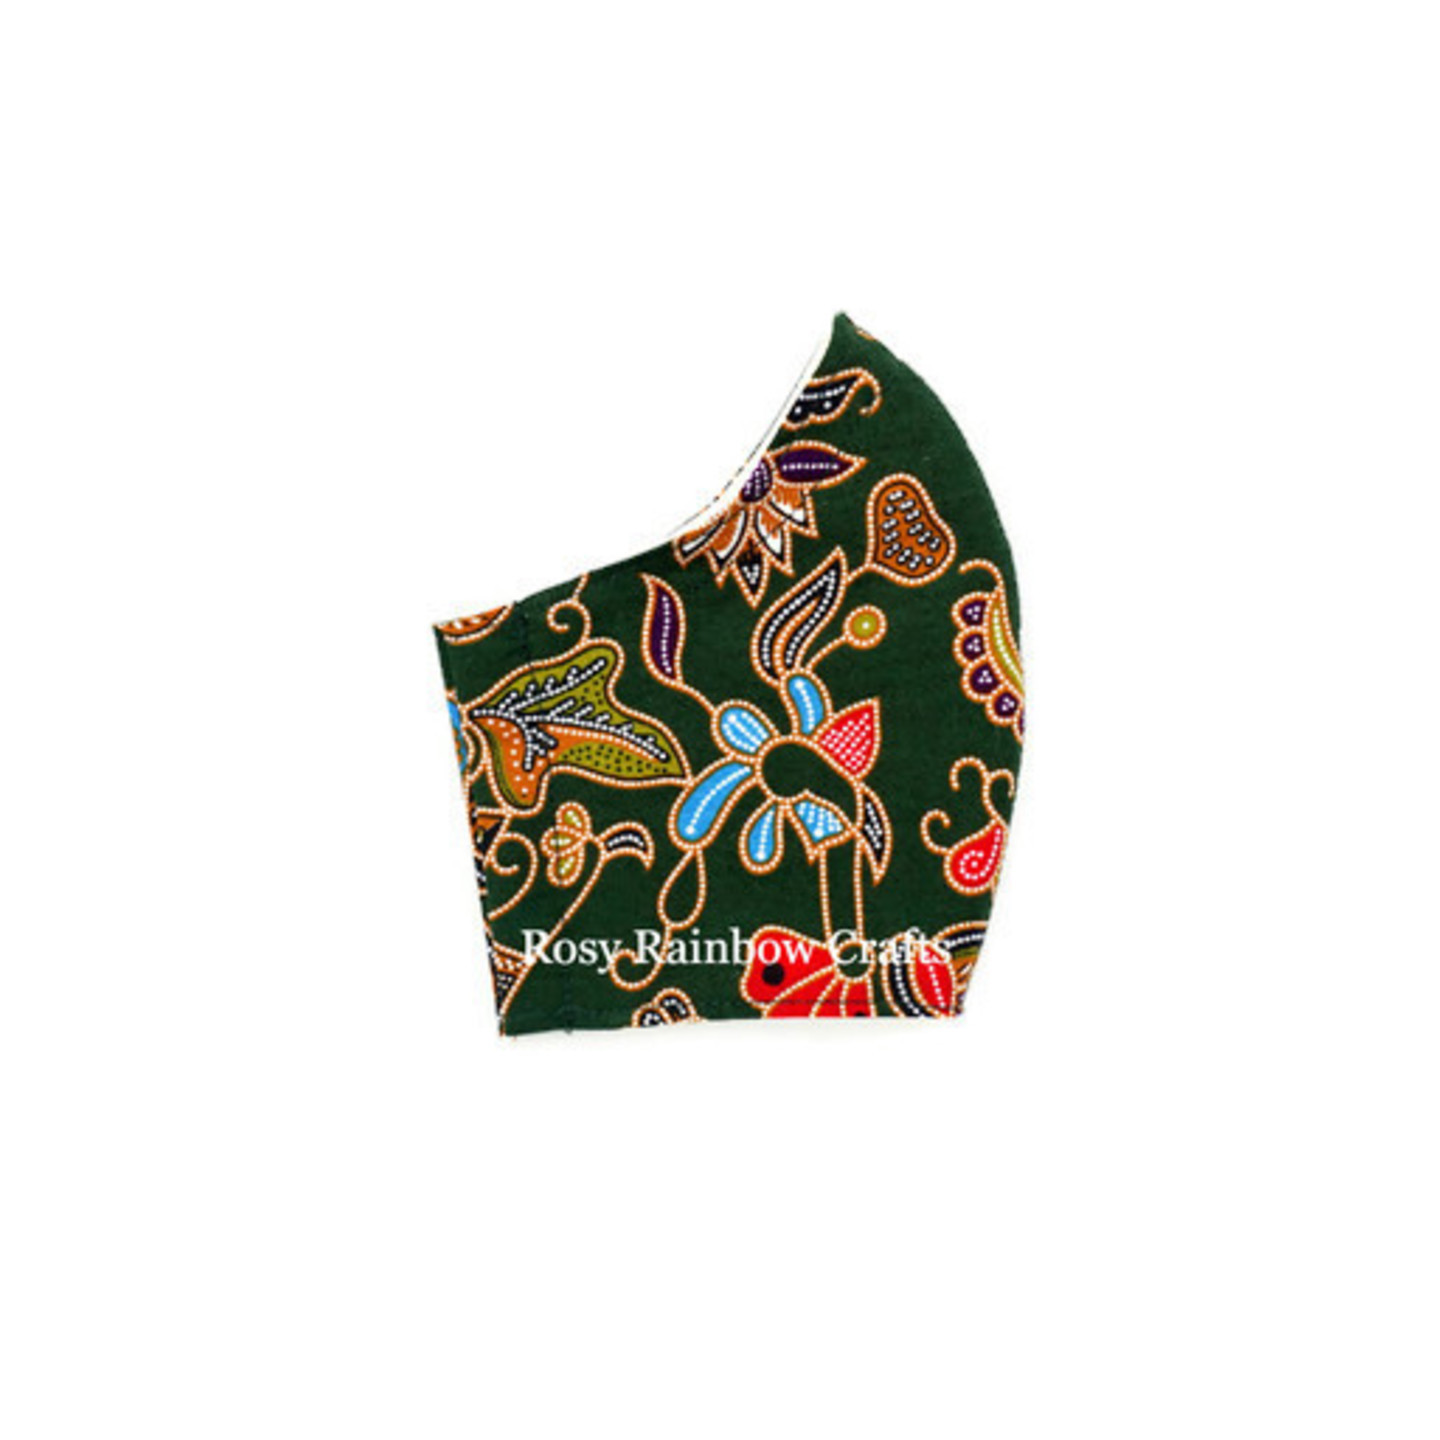 Exclusive Handmade Masks Inspired SQ Airlines Batik Army Green WomenTeenagers